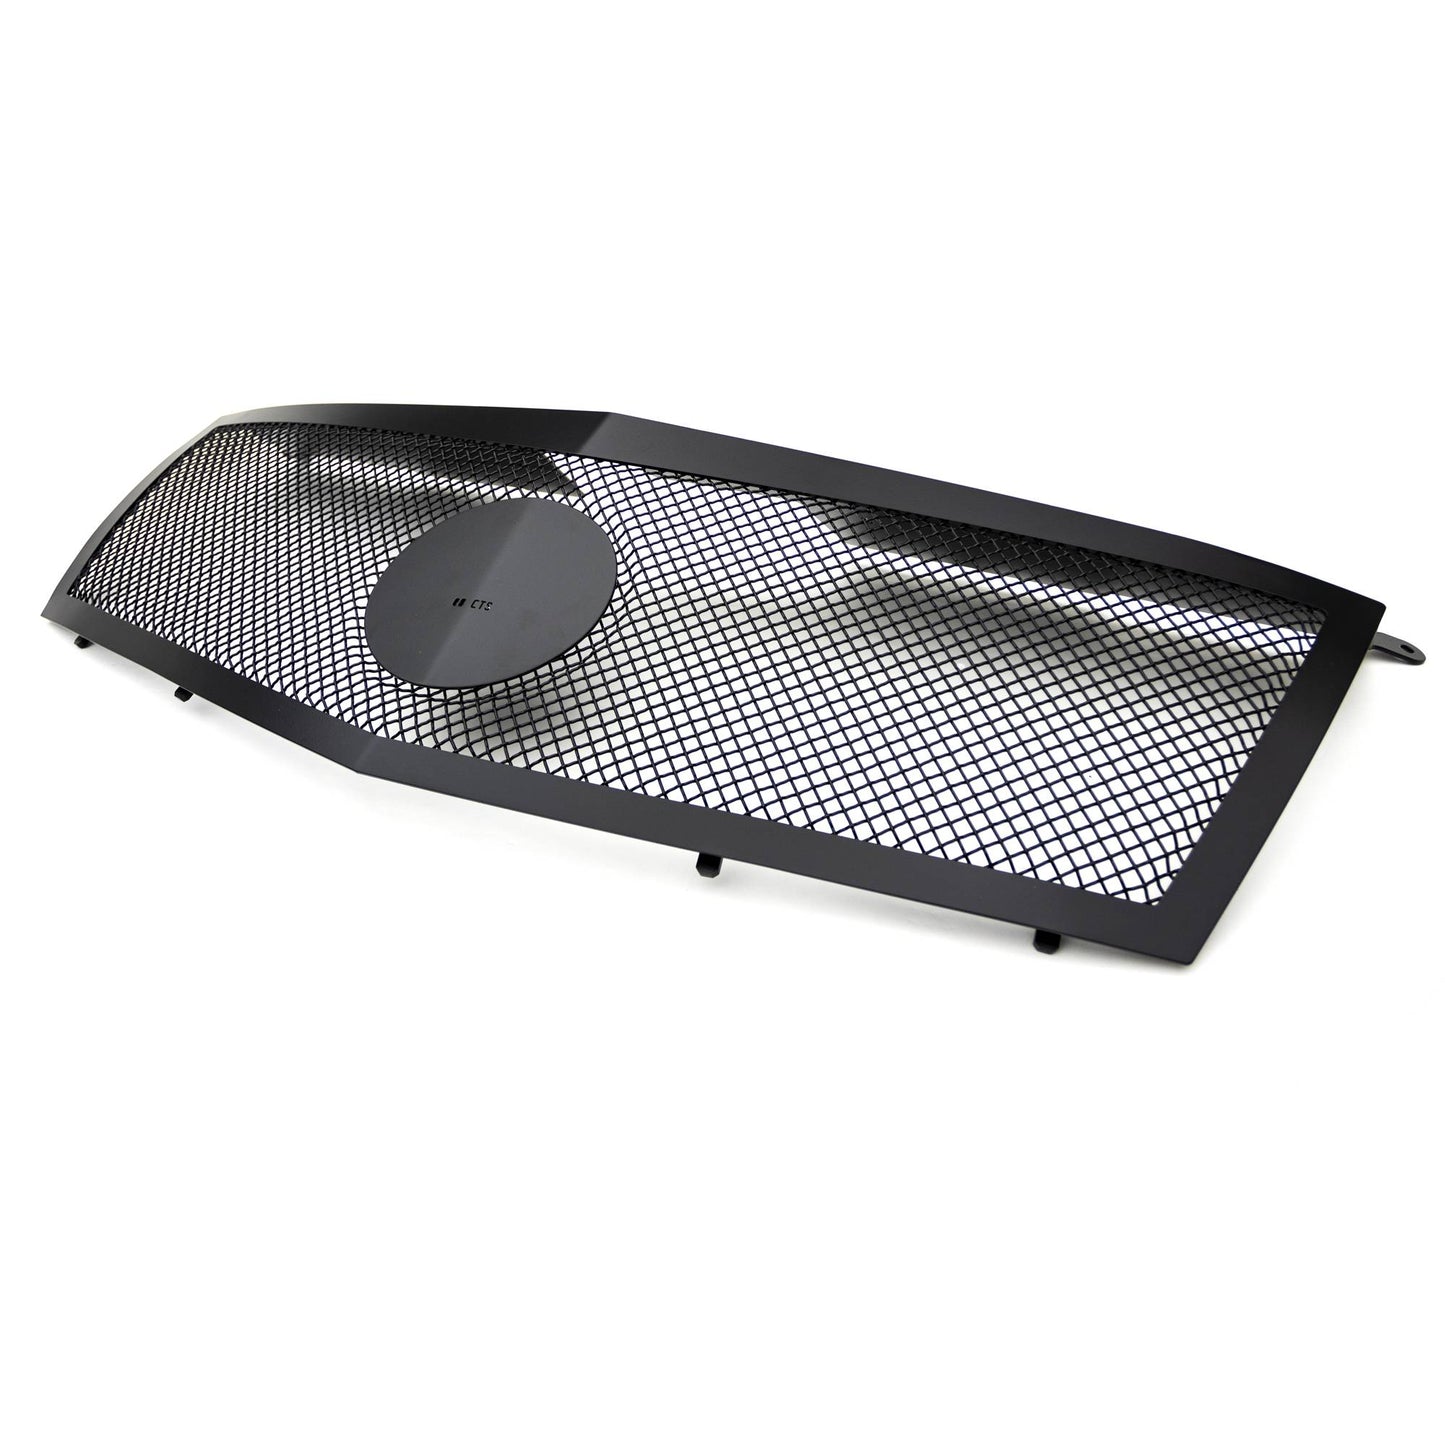 T-REX Grilles 51197 Black Mild Steel Small Mesh Grille Fits 2008-2013 Cadillac CTS CTS Coupe CTS Sport CTS Sport Wagon